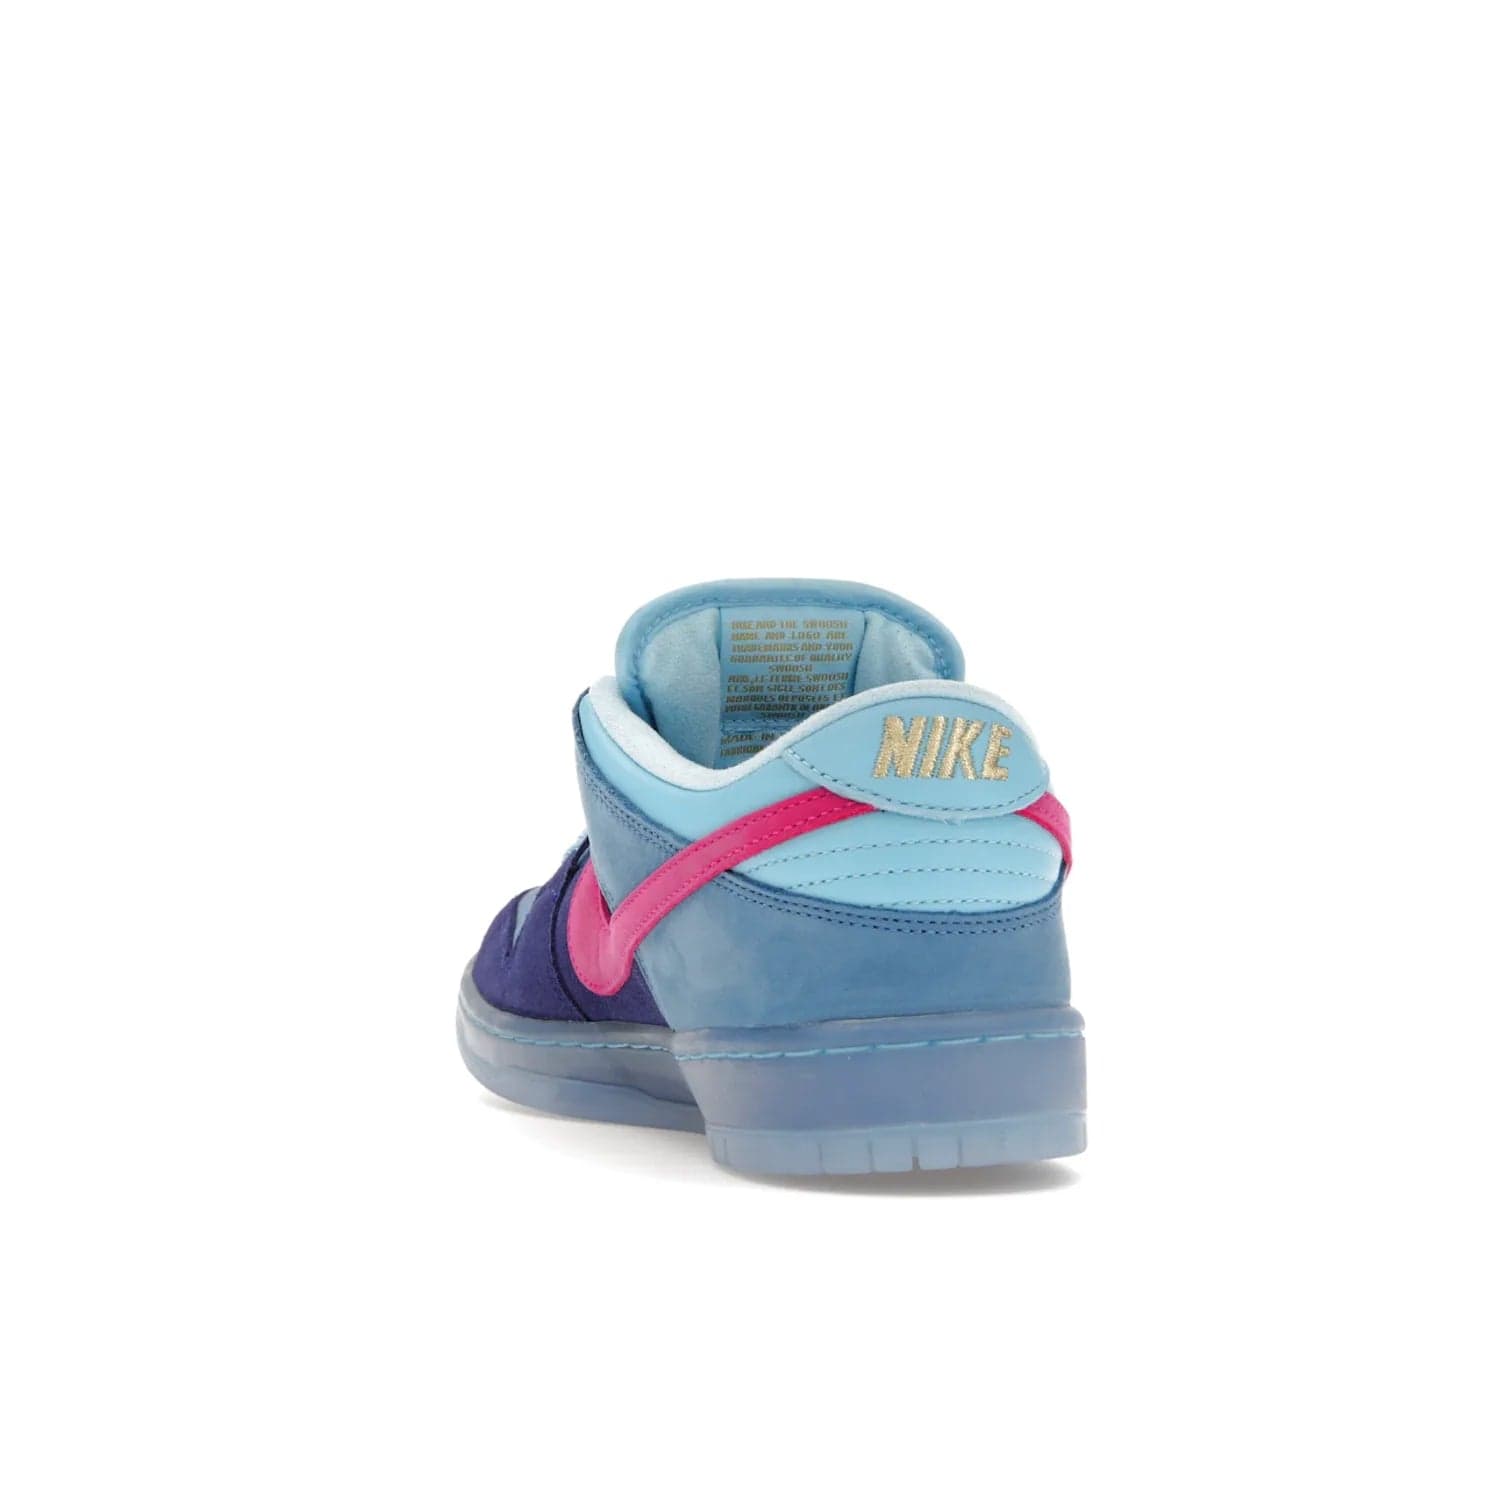 Nike SB Dunk Low Run The Jewels - Image 26 - Only at www.BallersClubKickz.com - The Nike SB Dunk Low Run The Jewels pays tribute to the Run the Jewels 3 album cover. It features a blue suede upper with pink suede accents, gold branding and 3 lace sets. RTJ insoles complete this limited edition sneaker. Get it now for your shoe collection.